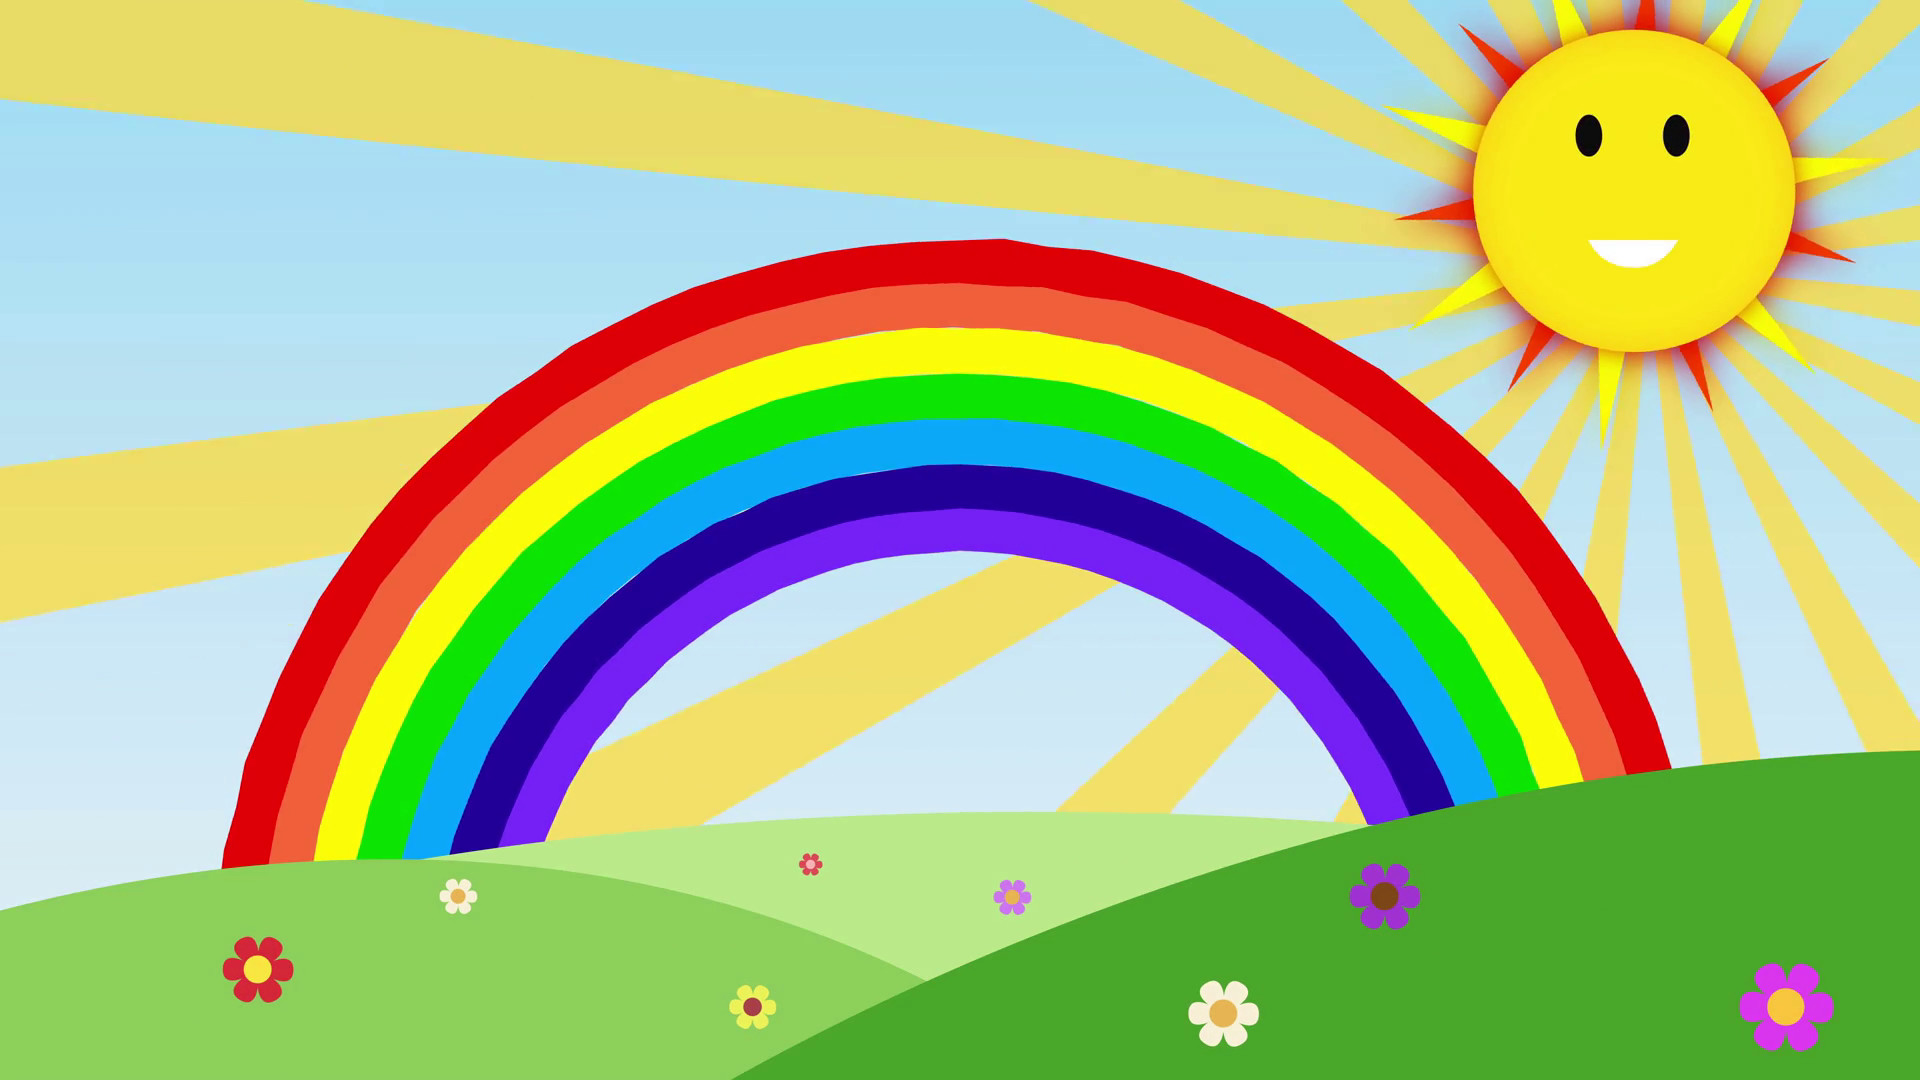 1920x1080 cute cartoon animation of smiling sun with colorful rainbow over the hills  with space for your text or logo. sun and rainbow seamless loop.